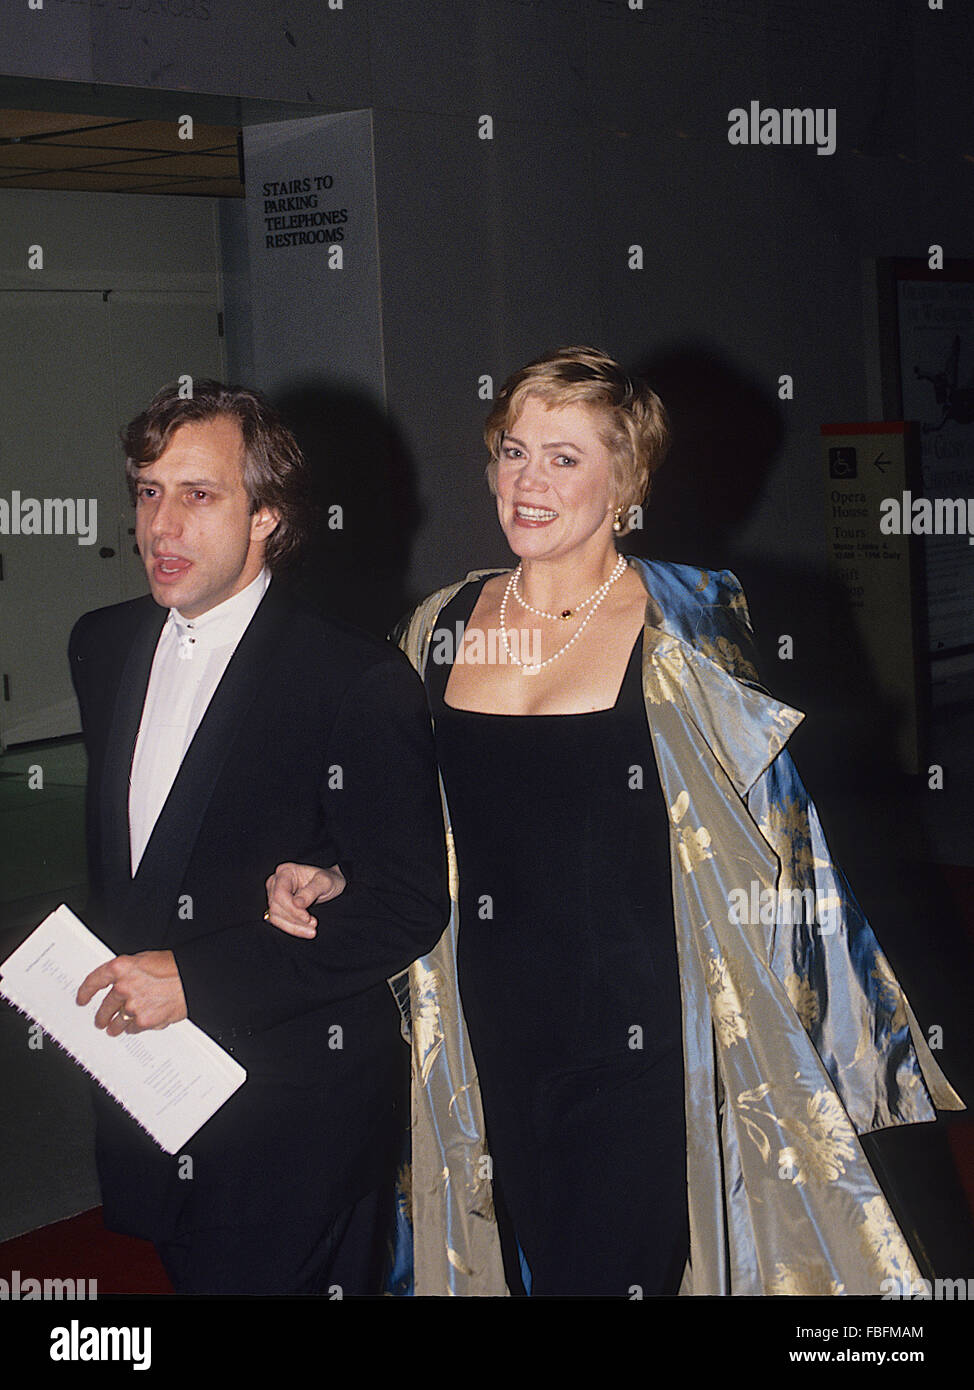 Washington, DC., USA, 5th December, 1993 Kathleen Turner and her husband Jay Weiss arrive at the Kennedy Center Honors.  Mary Kathleen Turner, better known as Kathleen Turner, is an American film and stage actress and director. Turner came to fame during the 1980s, after roles in Body Heat (1981), Romancing the Stone (1984), and Prizzi's Honor (1985), the latter two earning her a Golden Globe Award for Best Actress.  Credit: Mark Reinstein Stock Photo